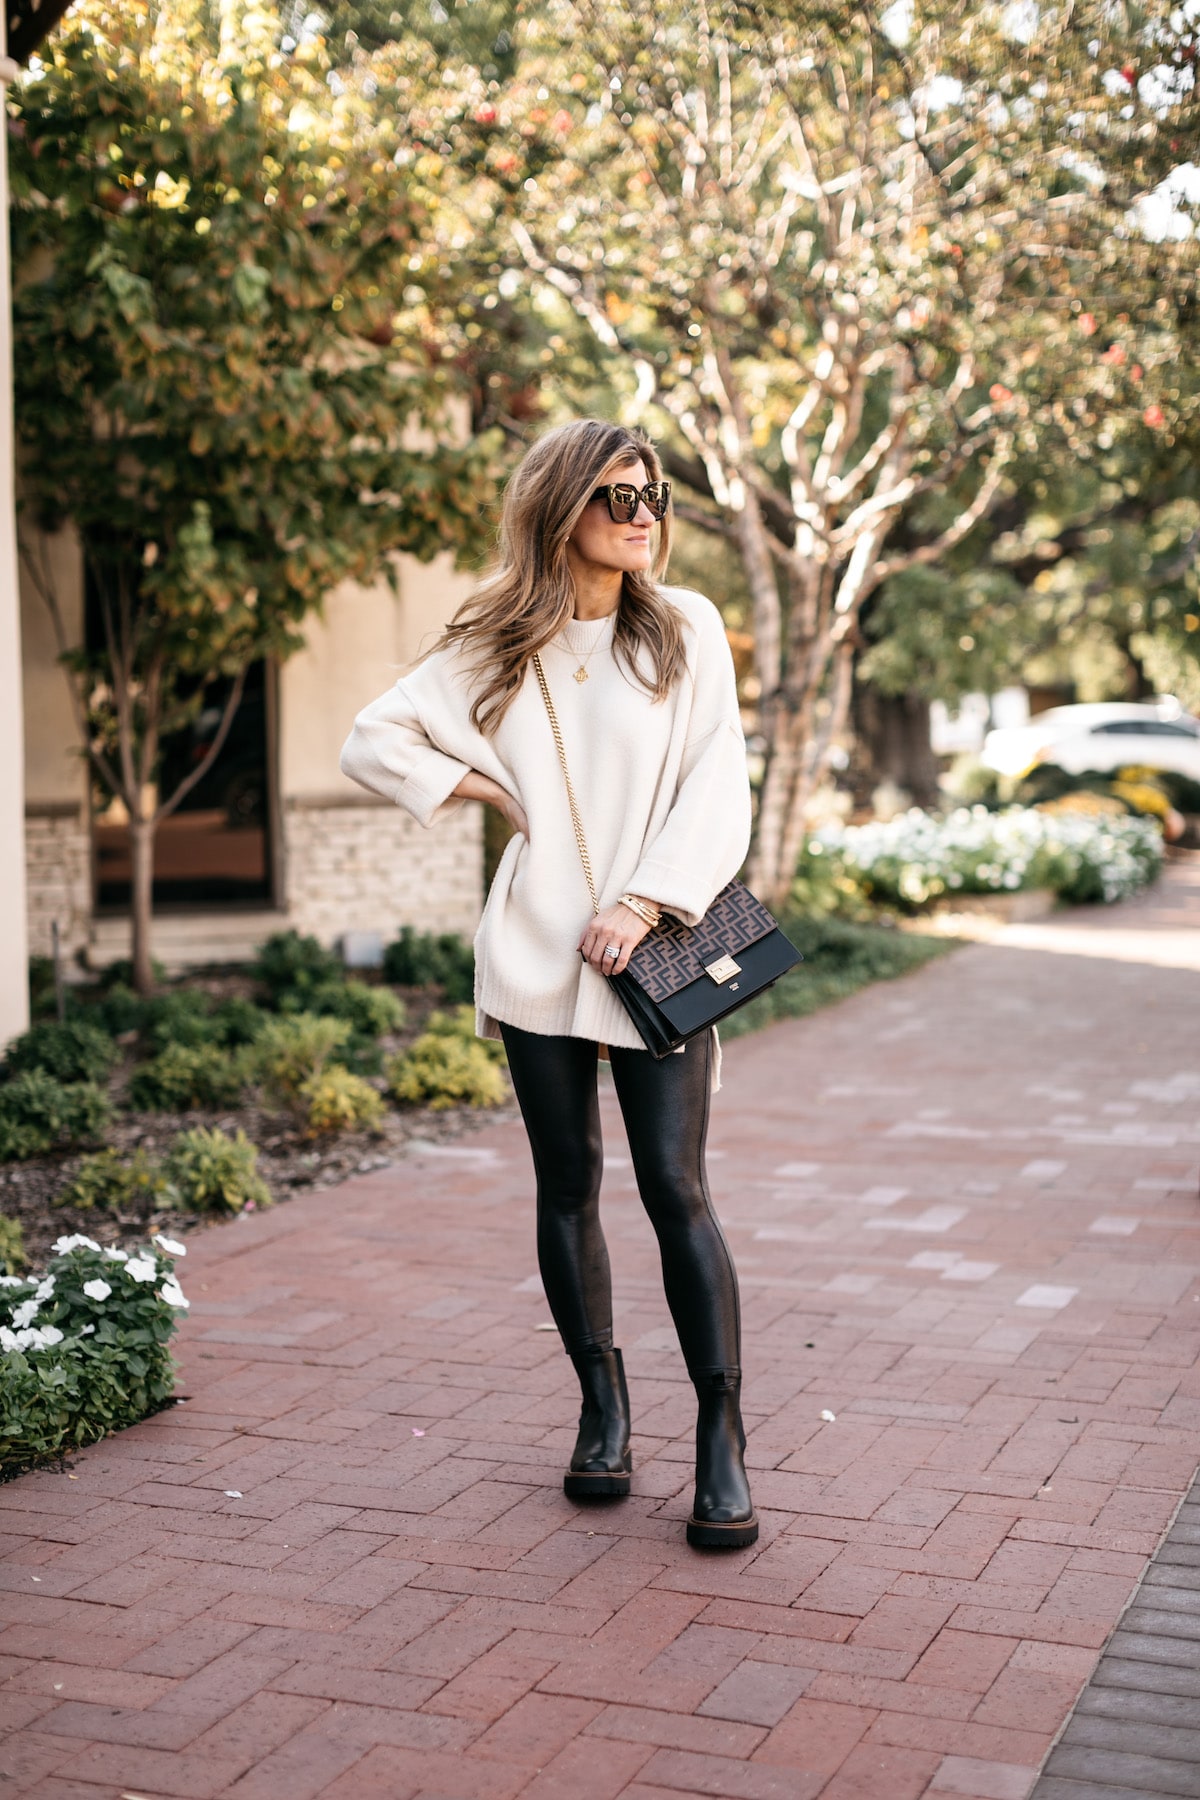 brighton butler wearing faux leather leggings with oversized sweater and chelasea boots